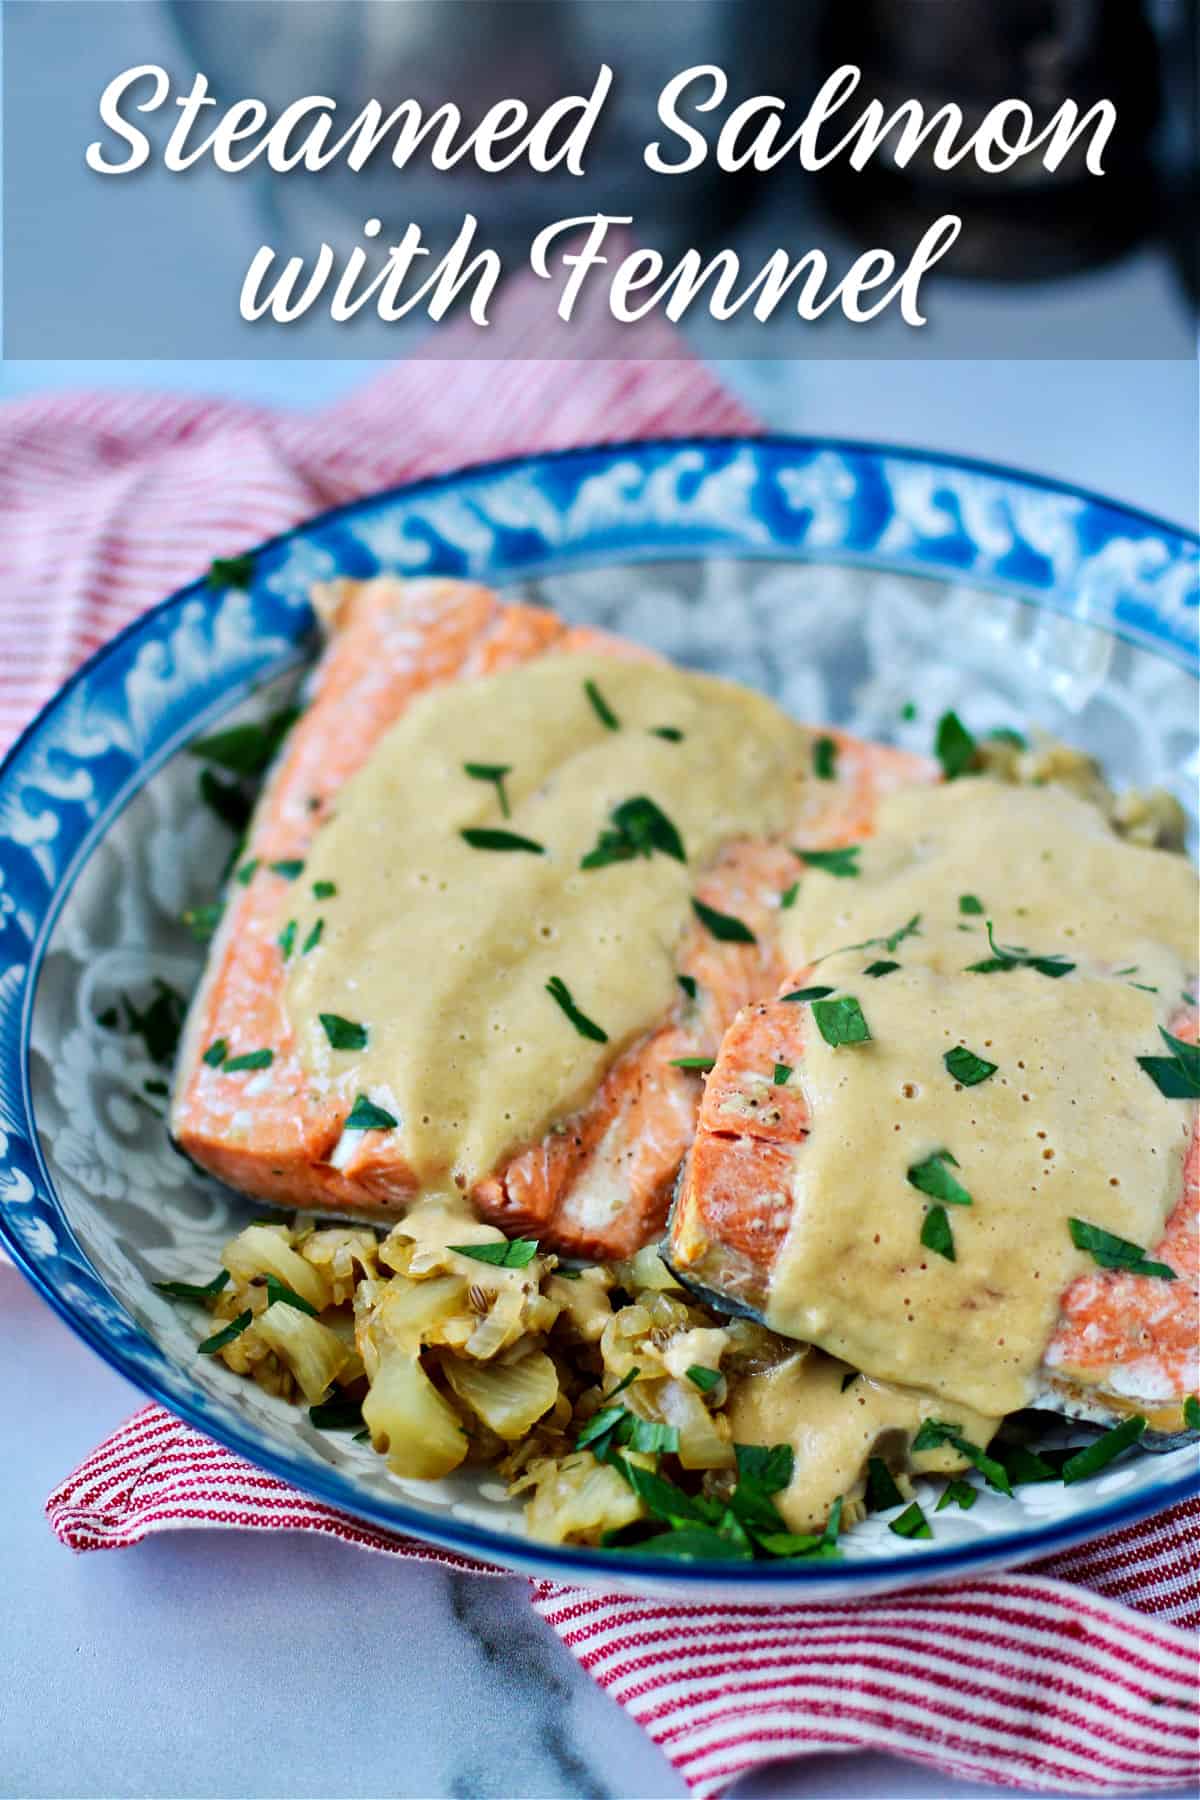 Steamed Salmon with Fennel